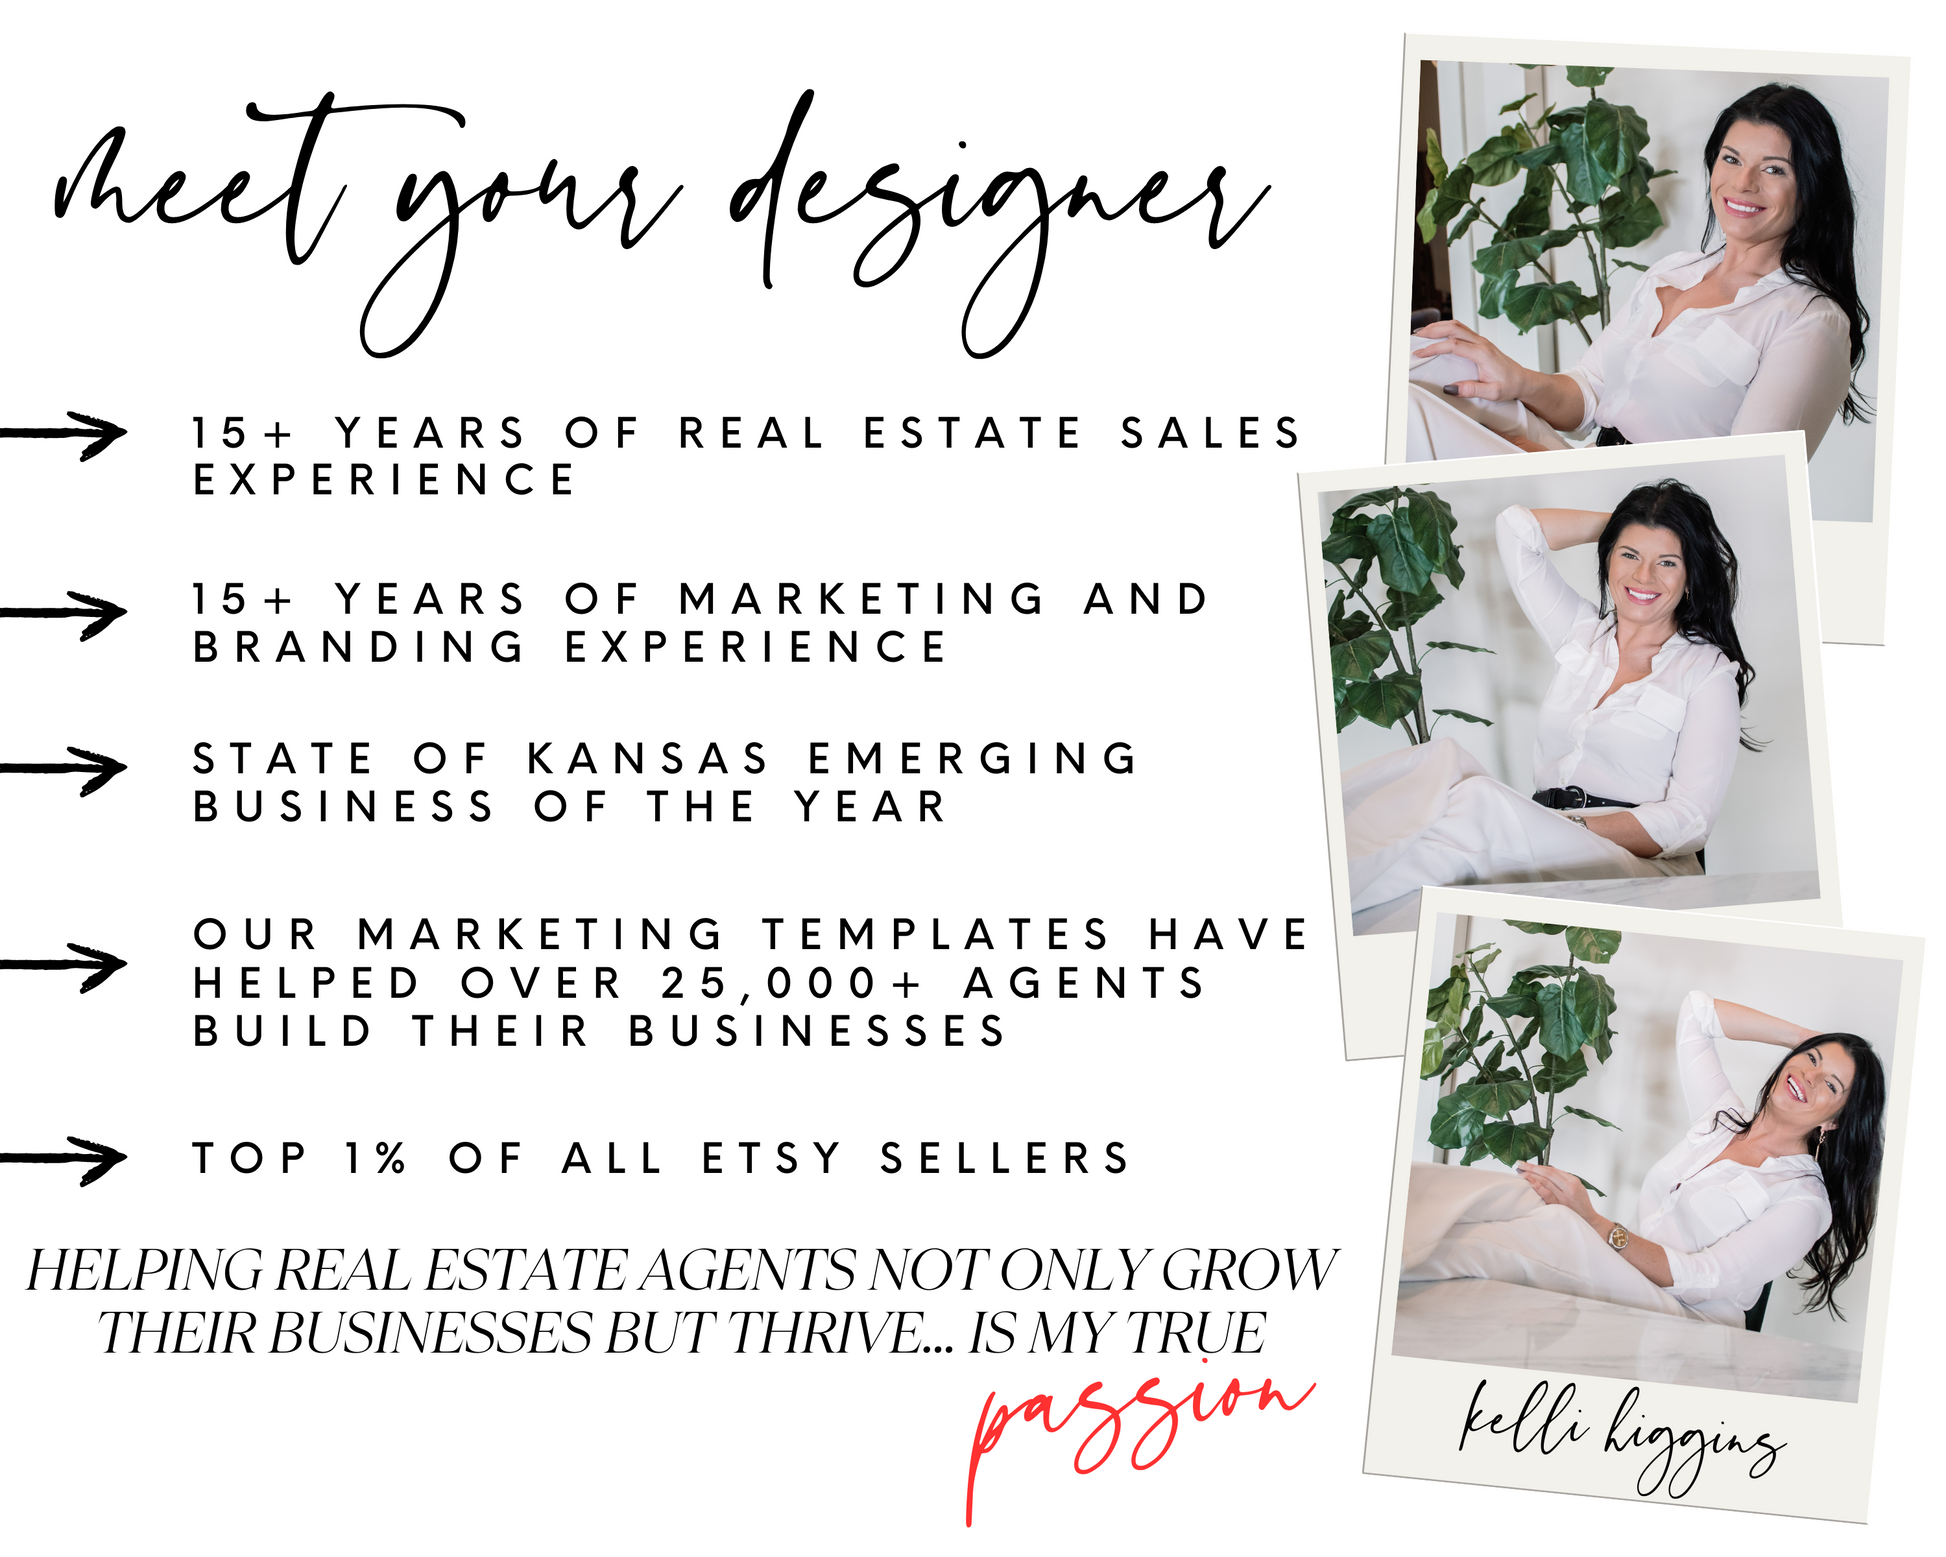 Hello, I am Kelli. The owner of Elevated Agent and your Real Estate Templates designer helping you elevate your real estate business